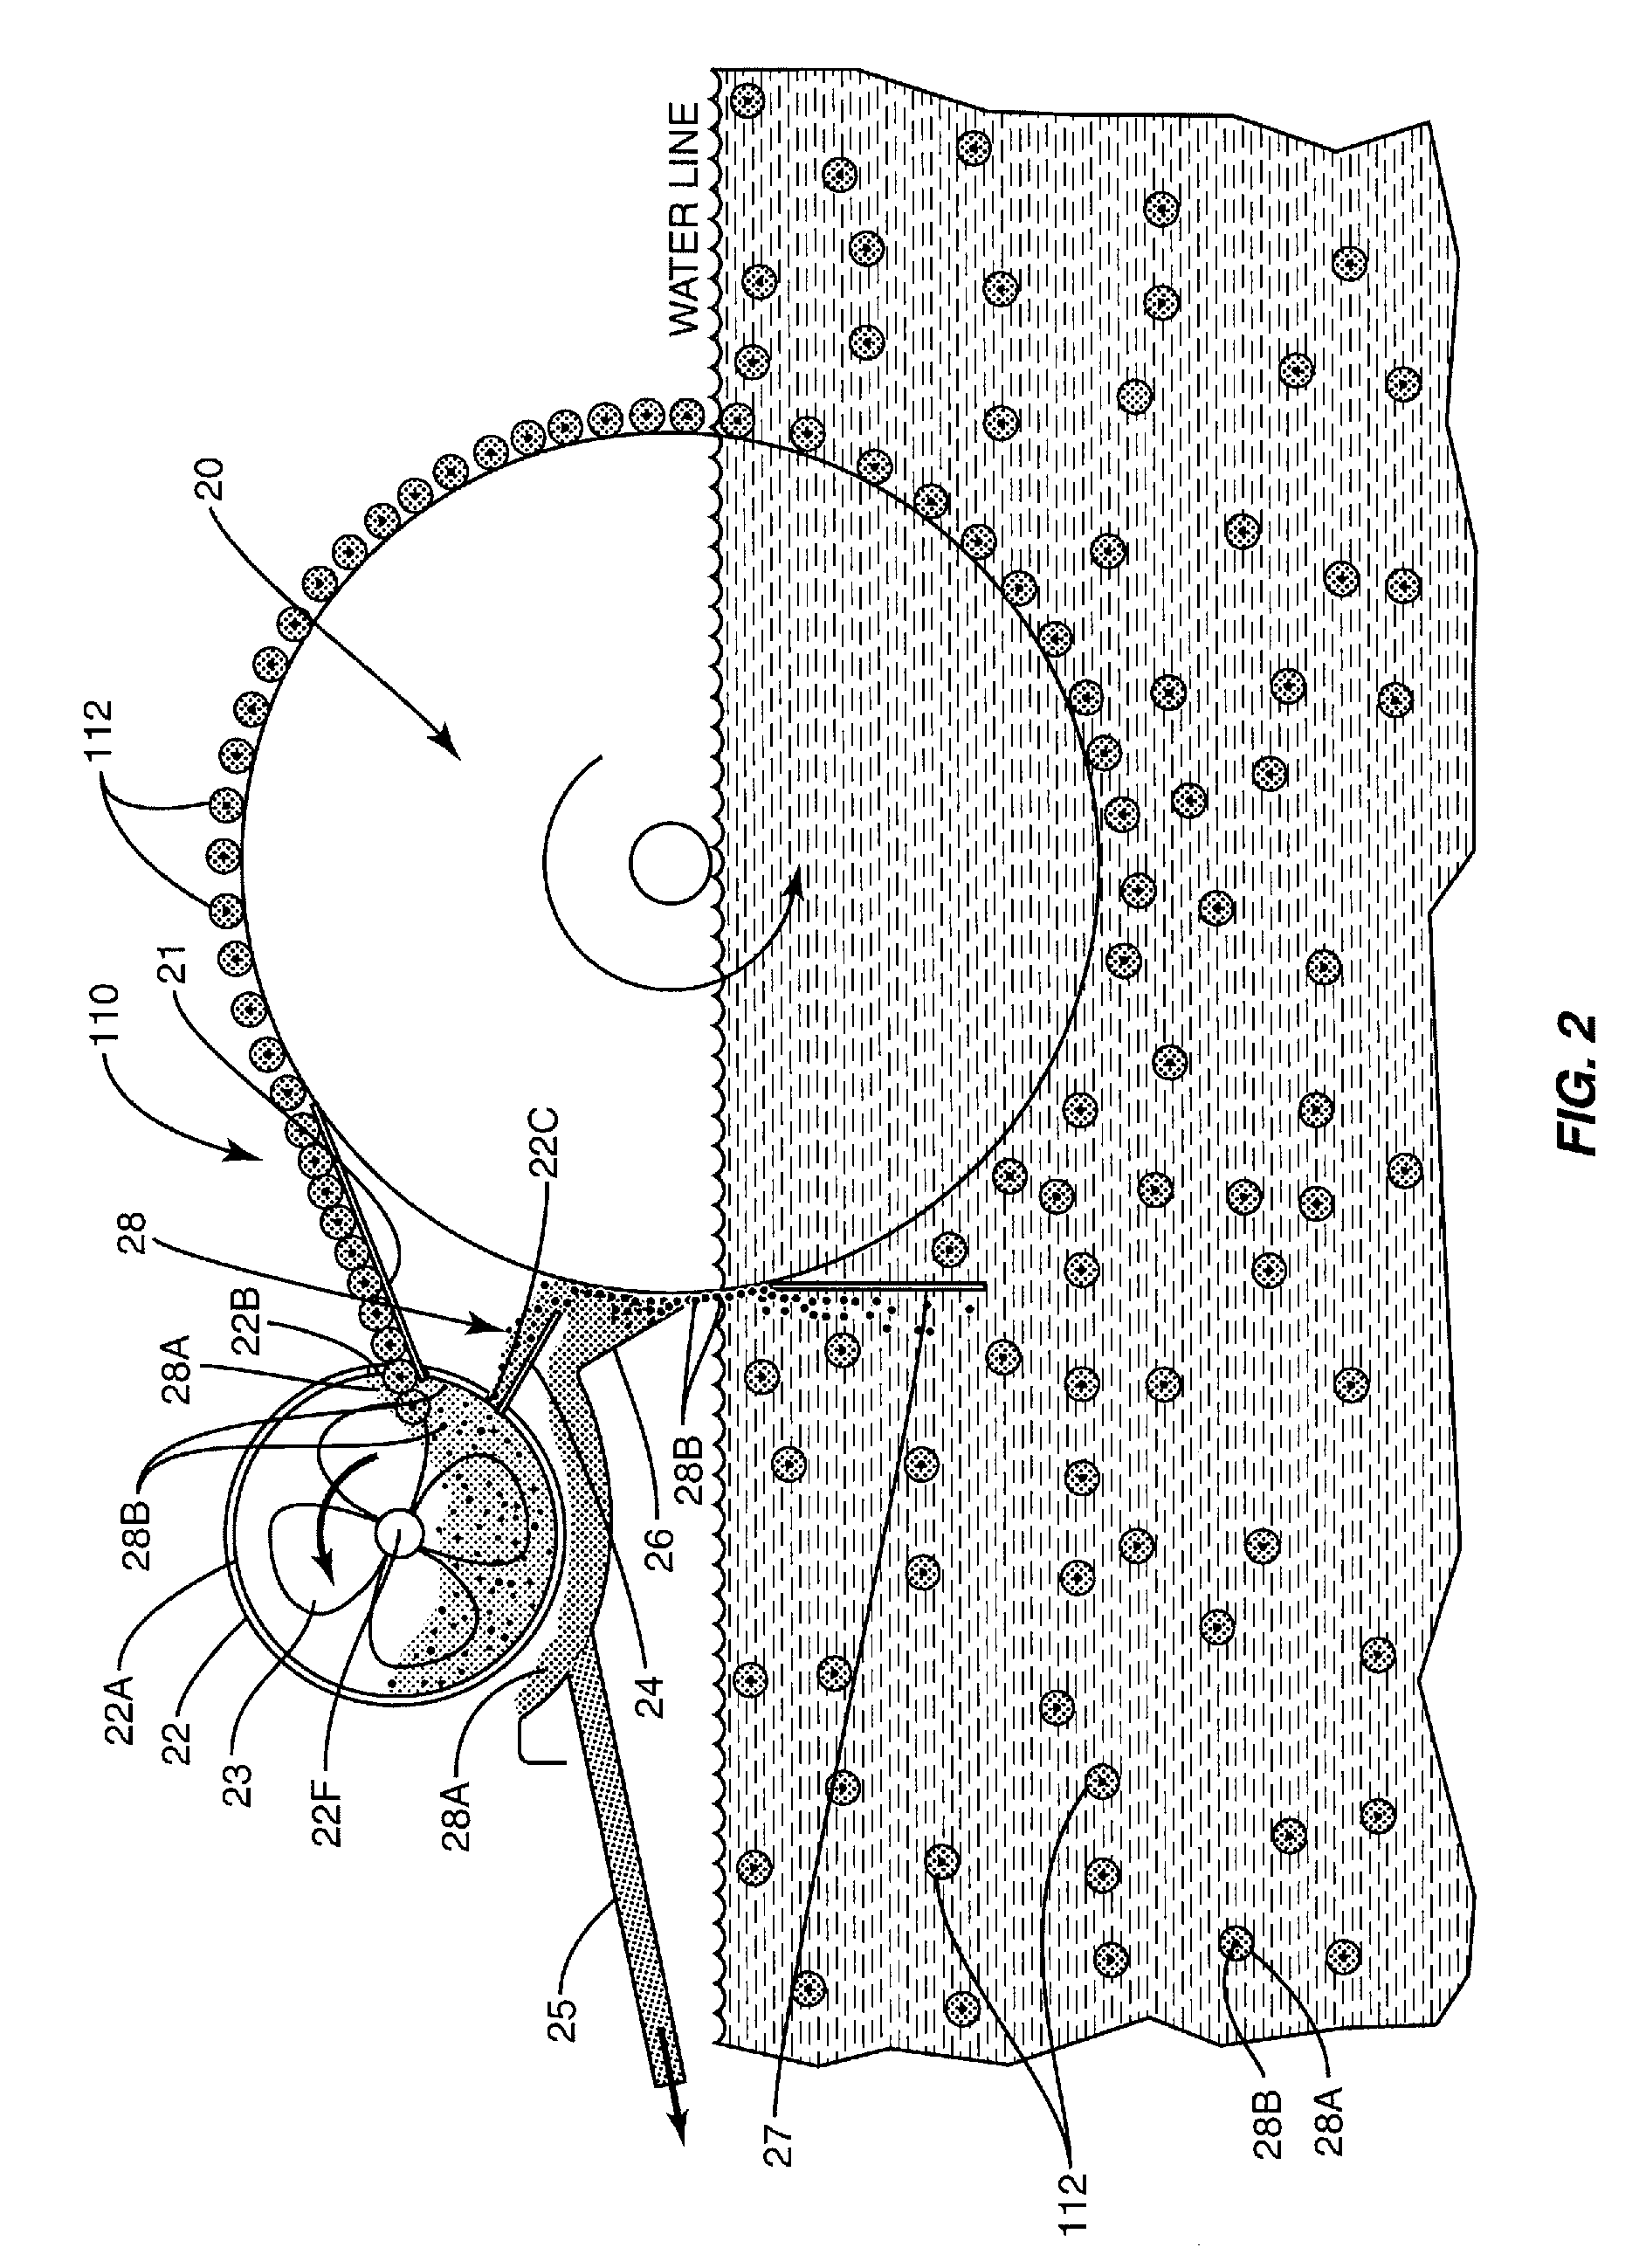 Device for Removing Magnetic Floc from a Magnetic Collector in a Water Treatment System